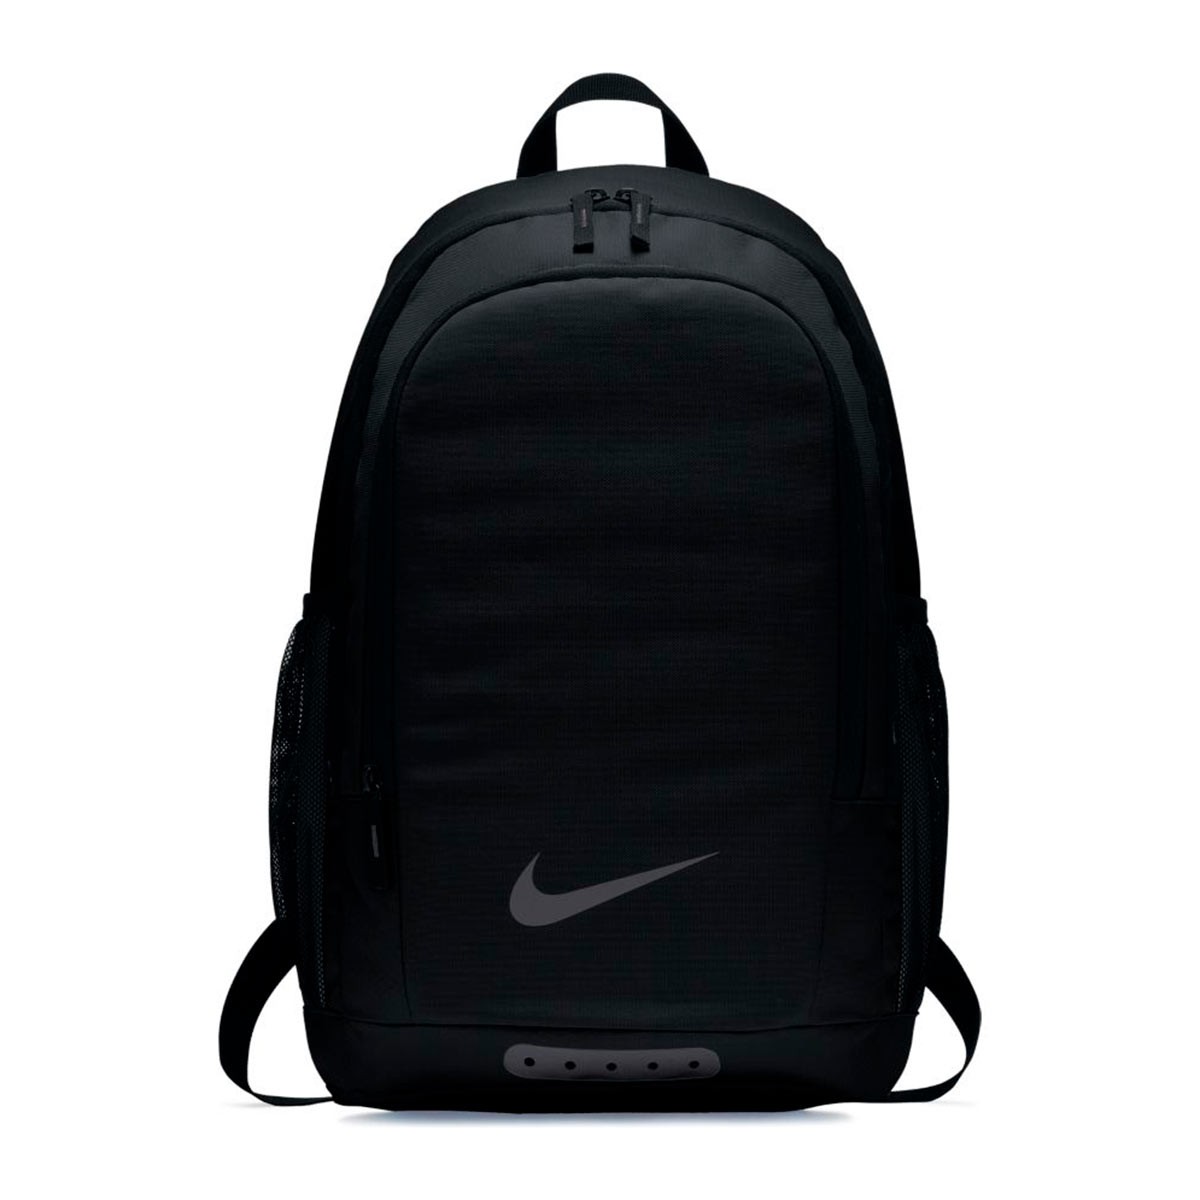 nike football bag with boot compartment